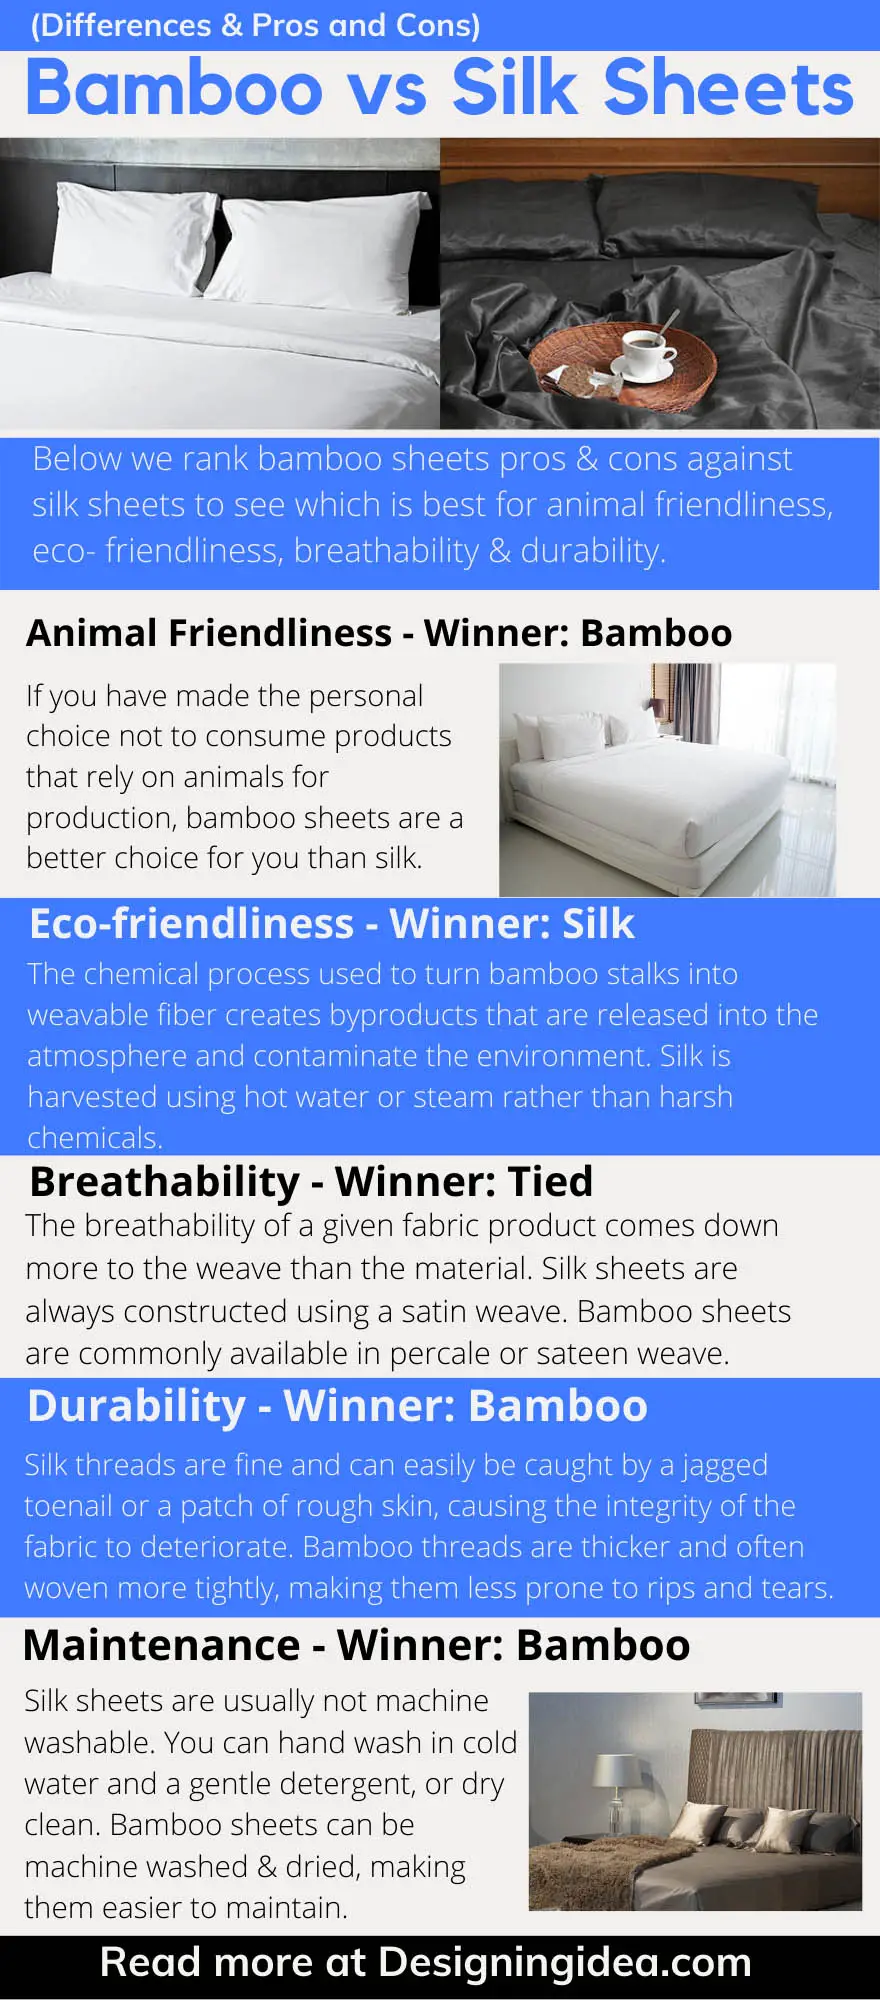 Bamboo vs silk sheets pros cons infographic